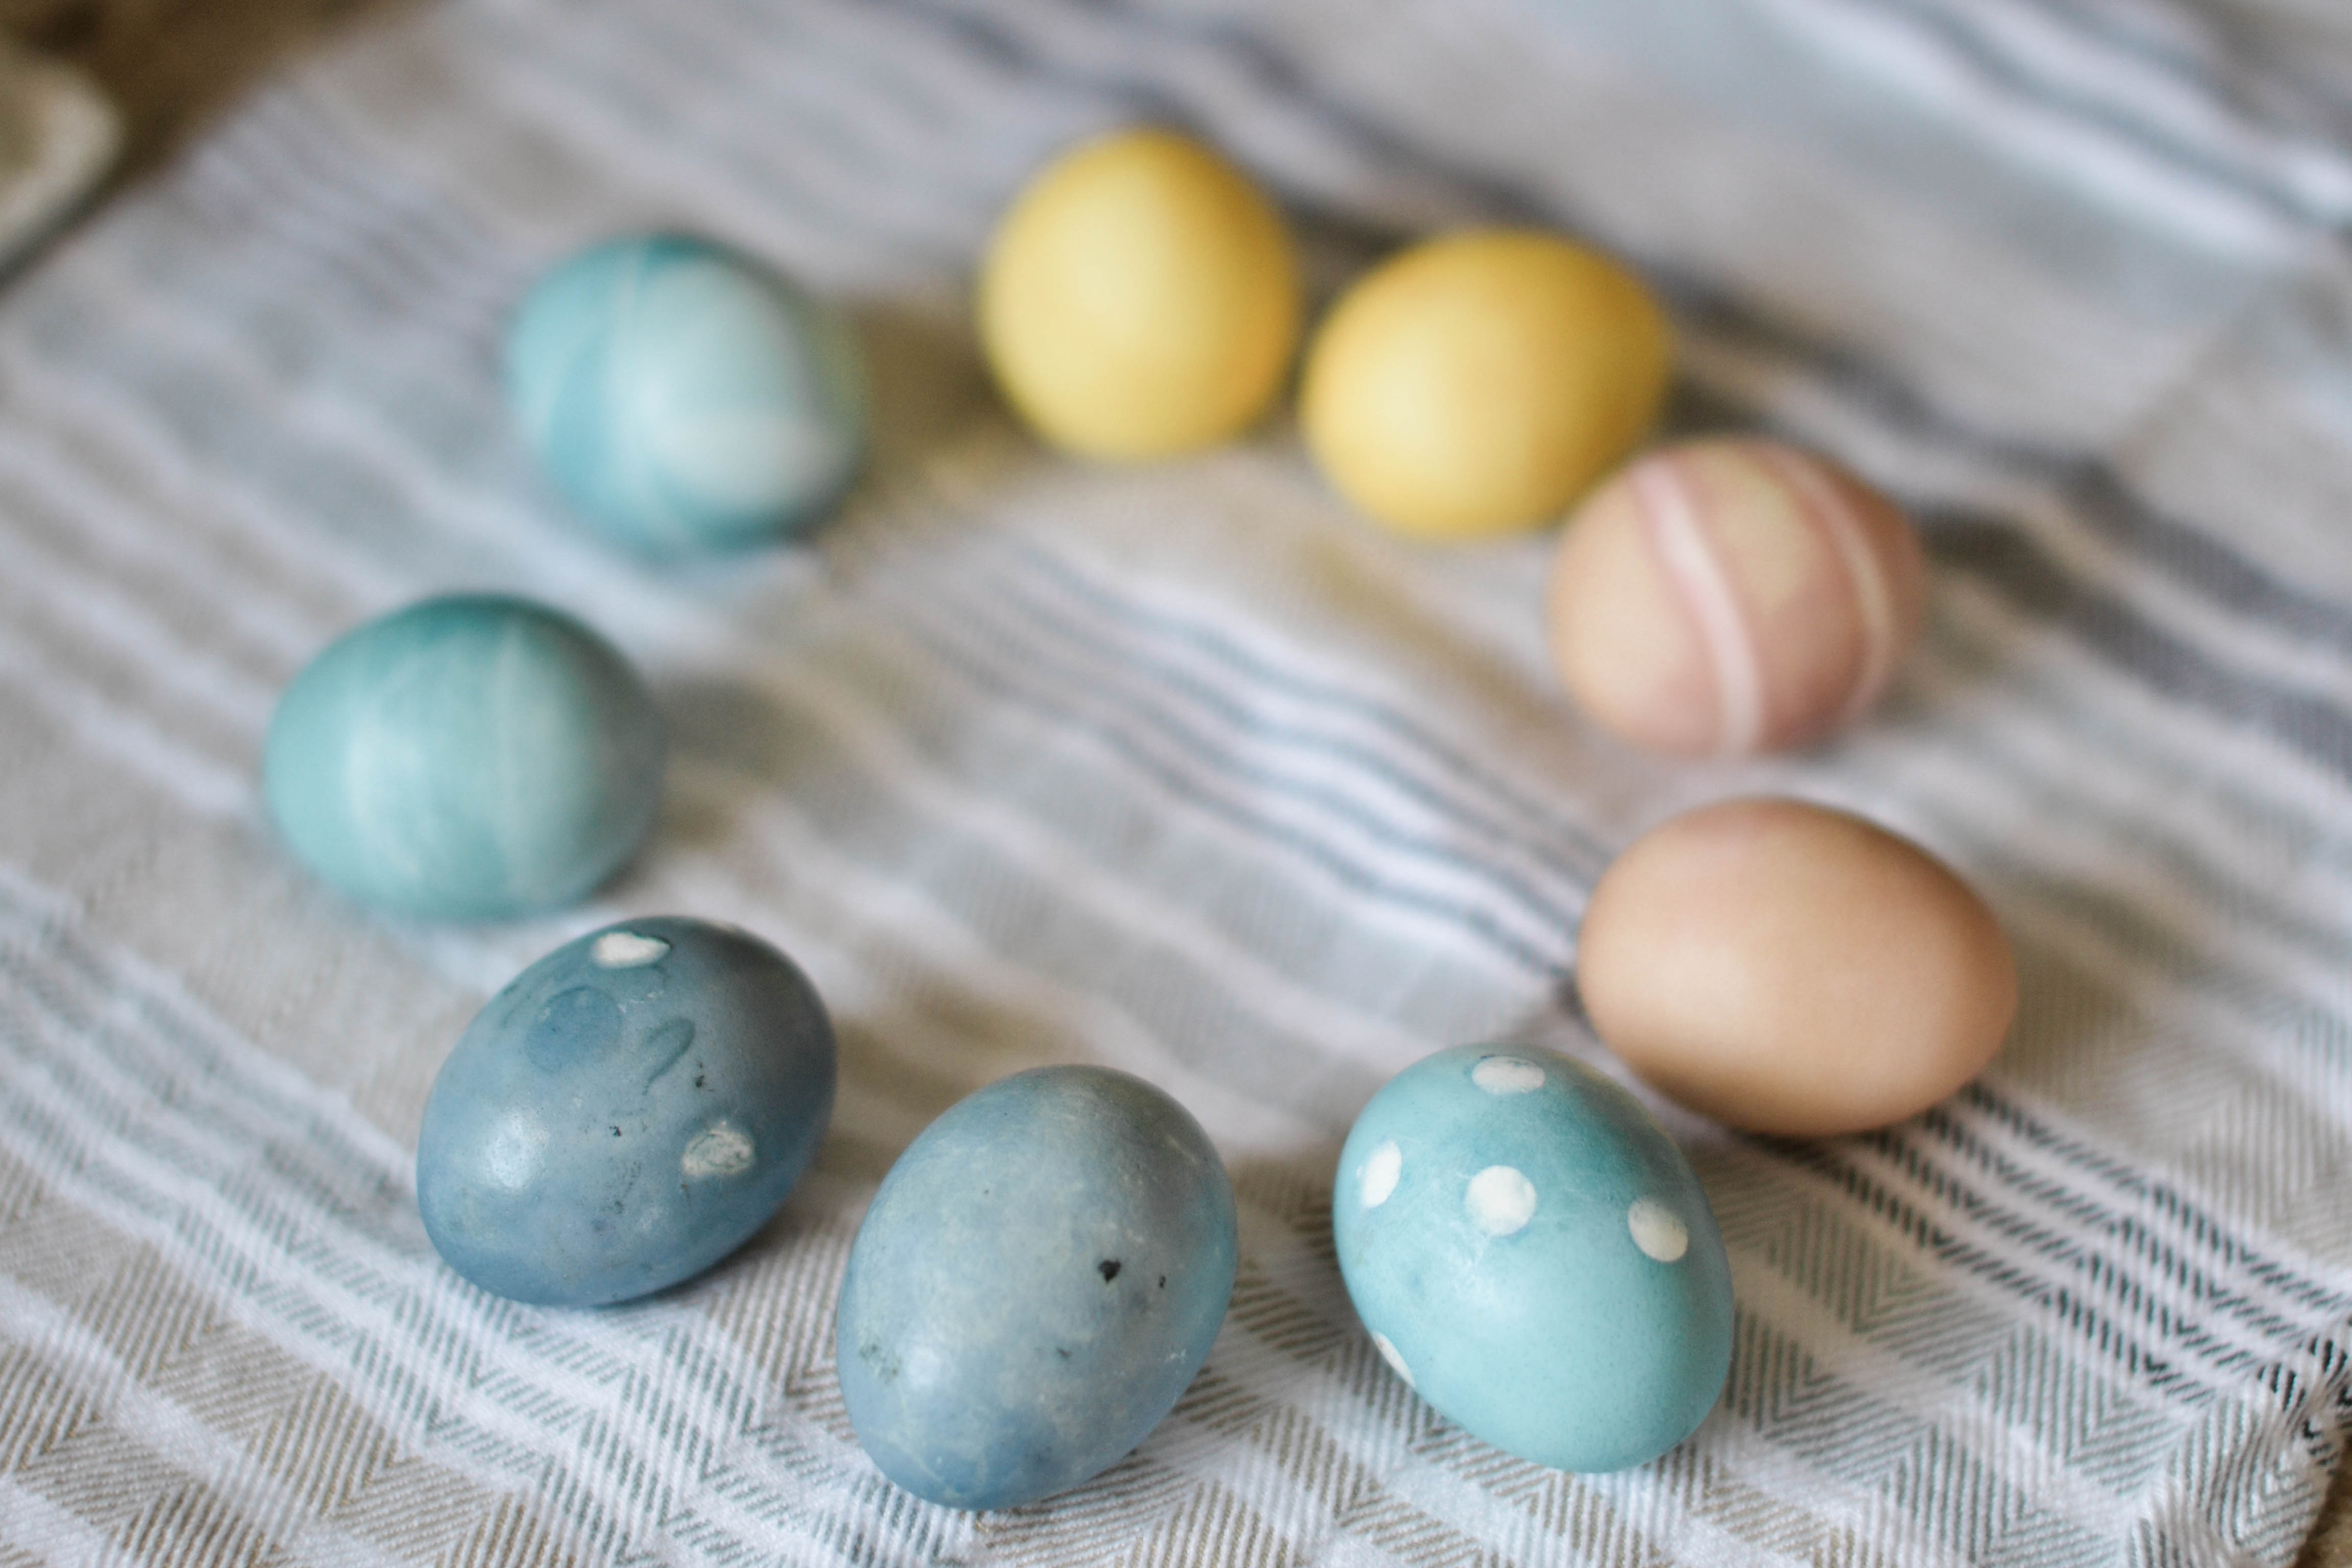 Natural Dyed Easter Eggs | TownLine Journal